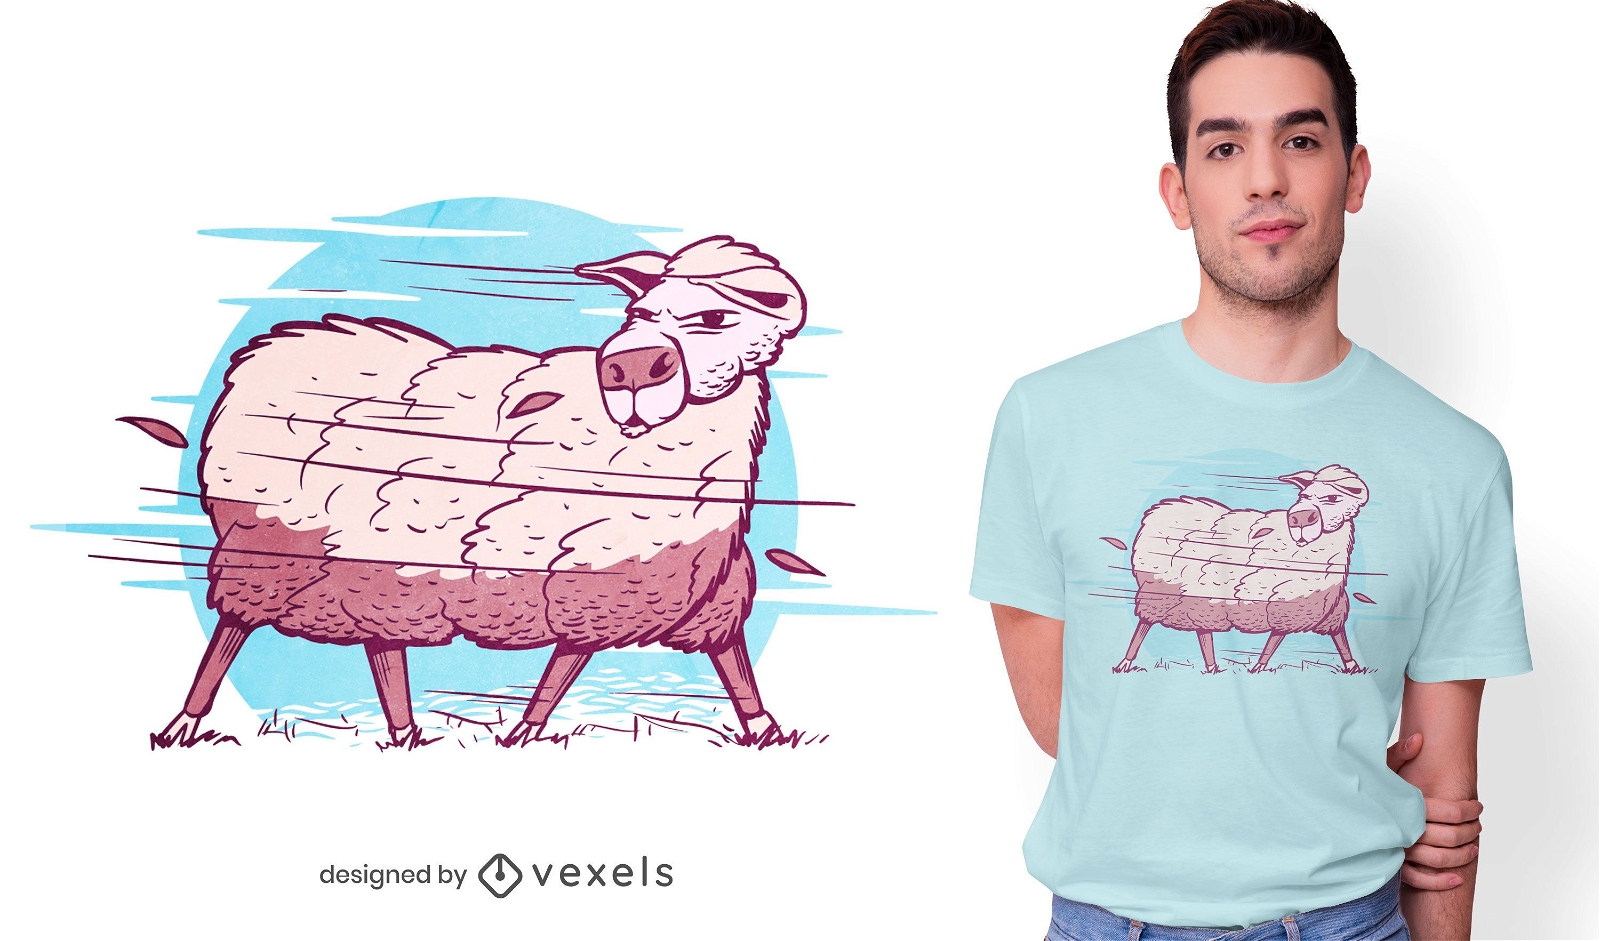 Sheep in a storm t-shirt design